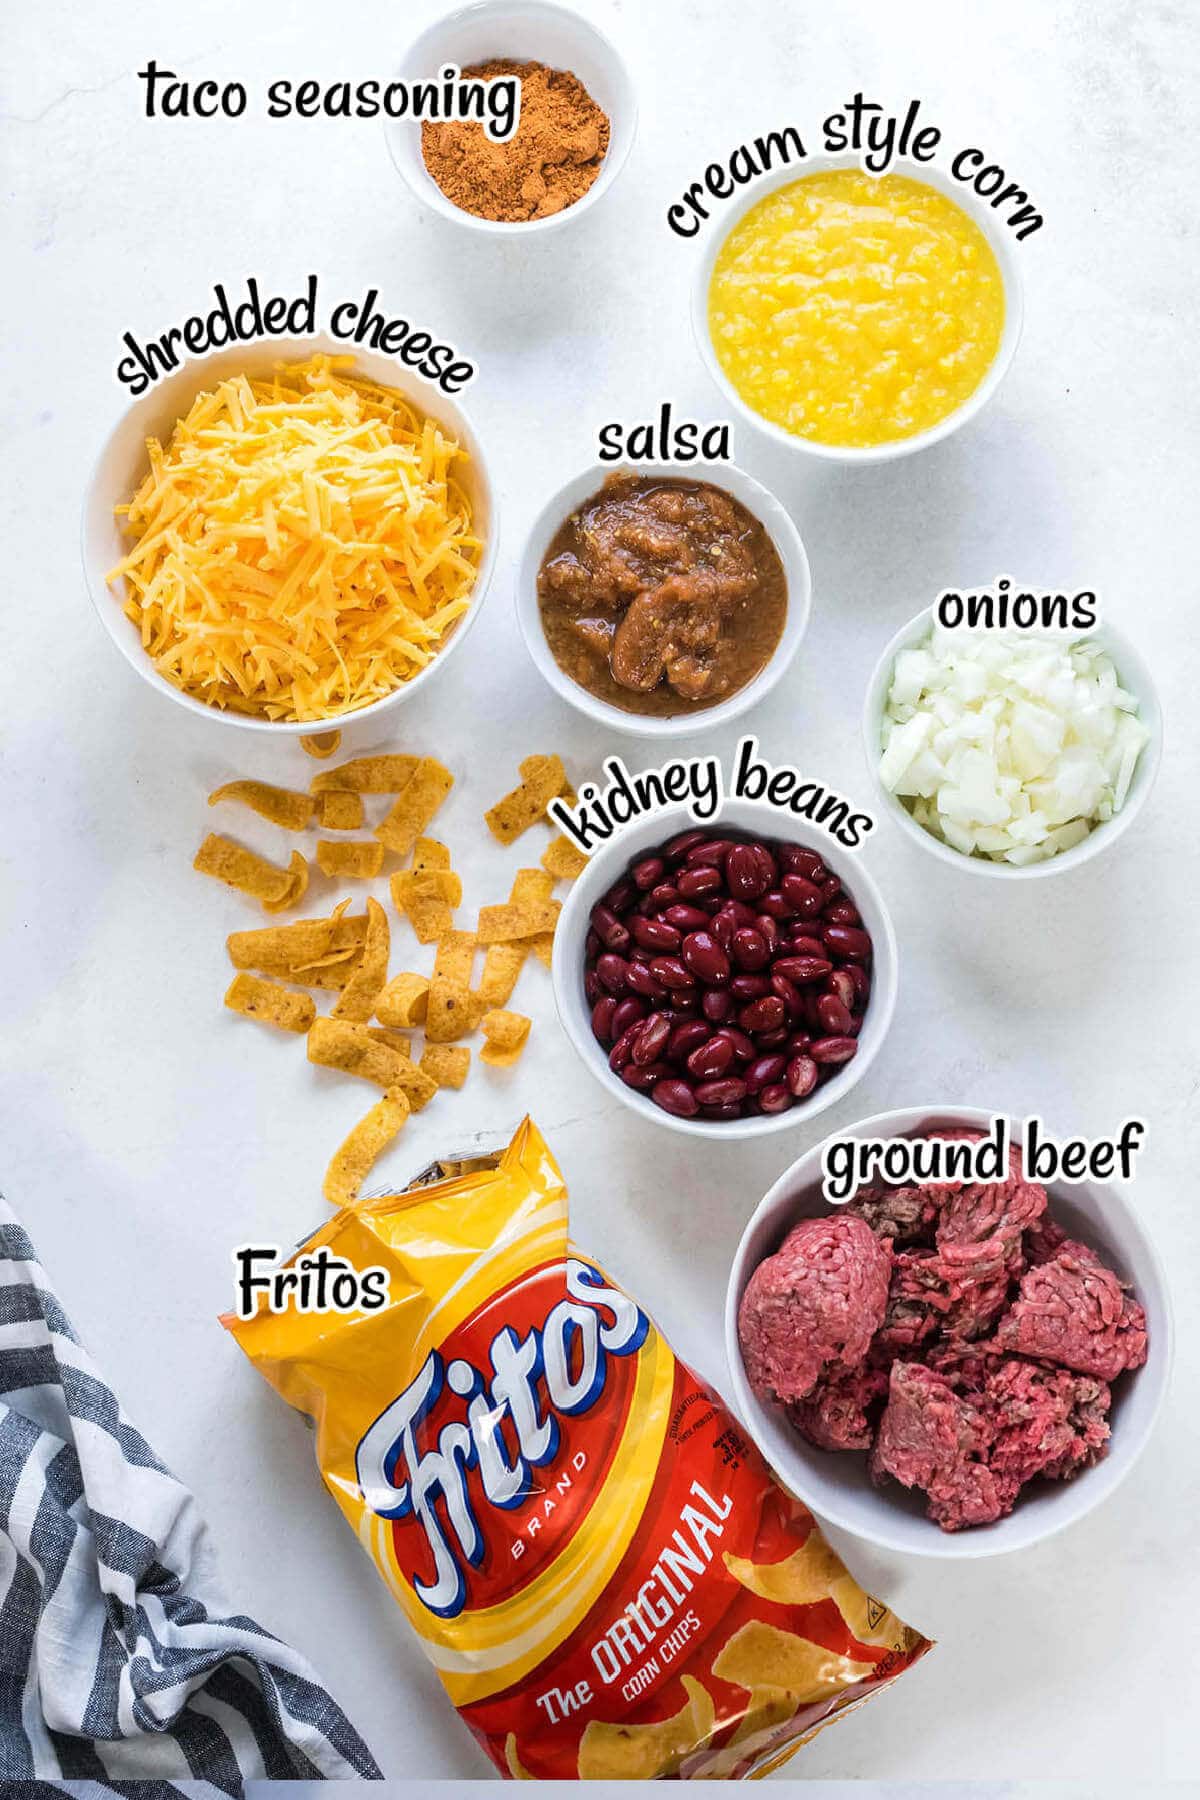 All of the ingredients laid out to make Frito Pie Casserole